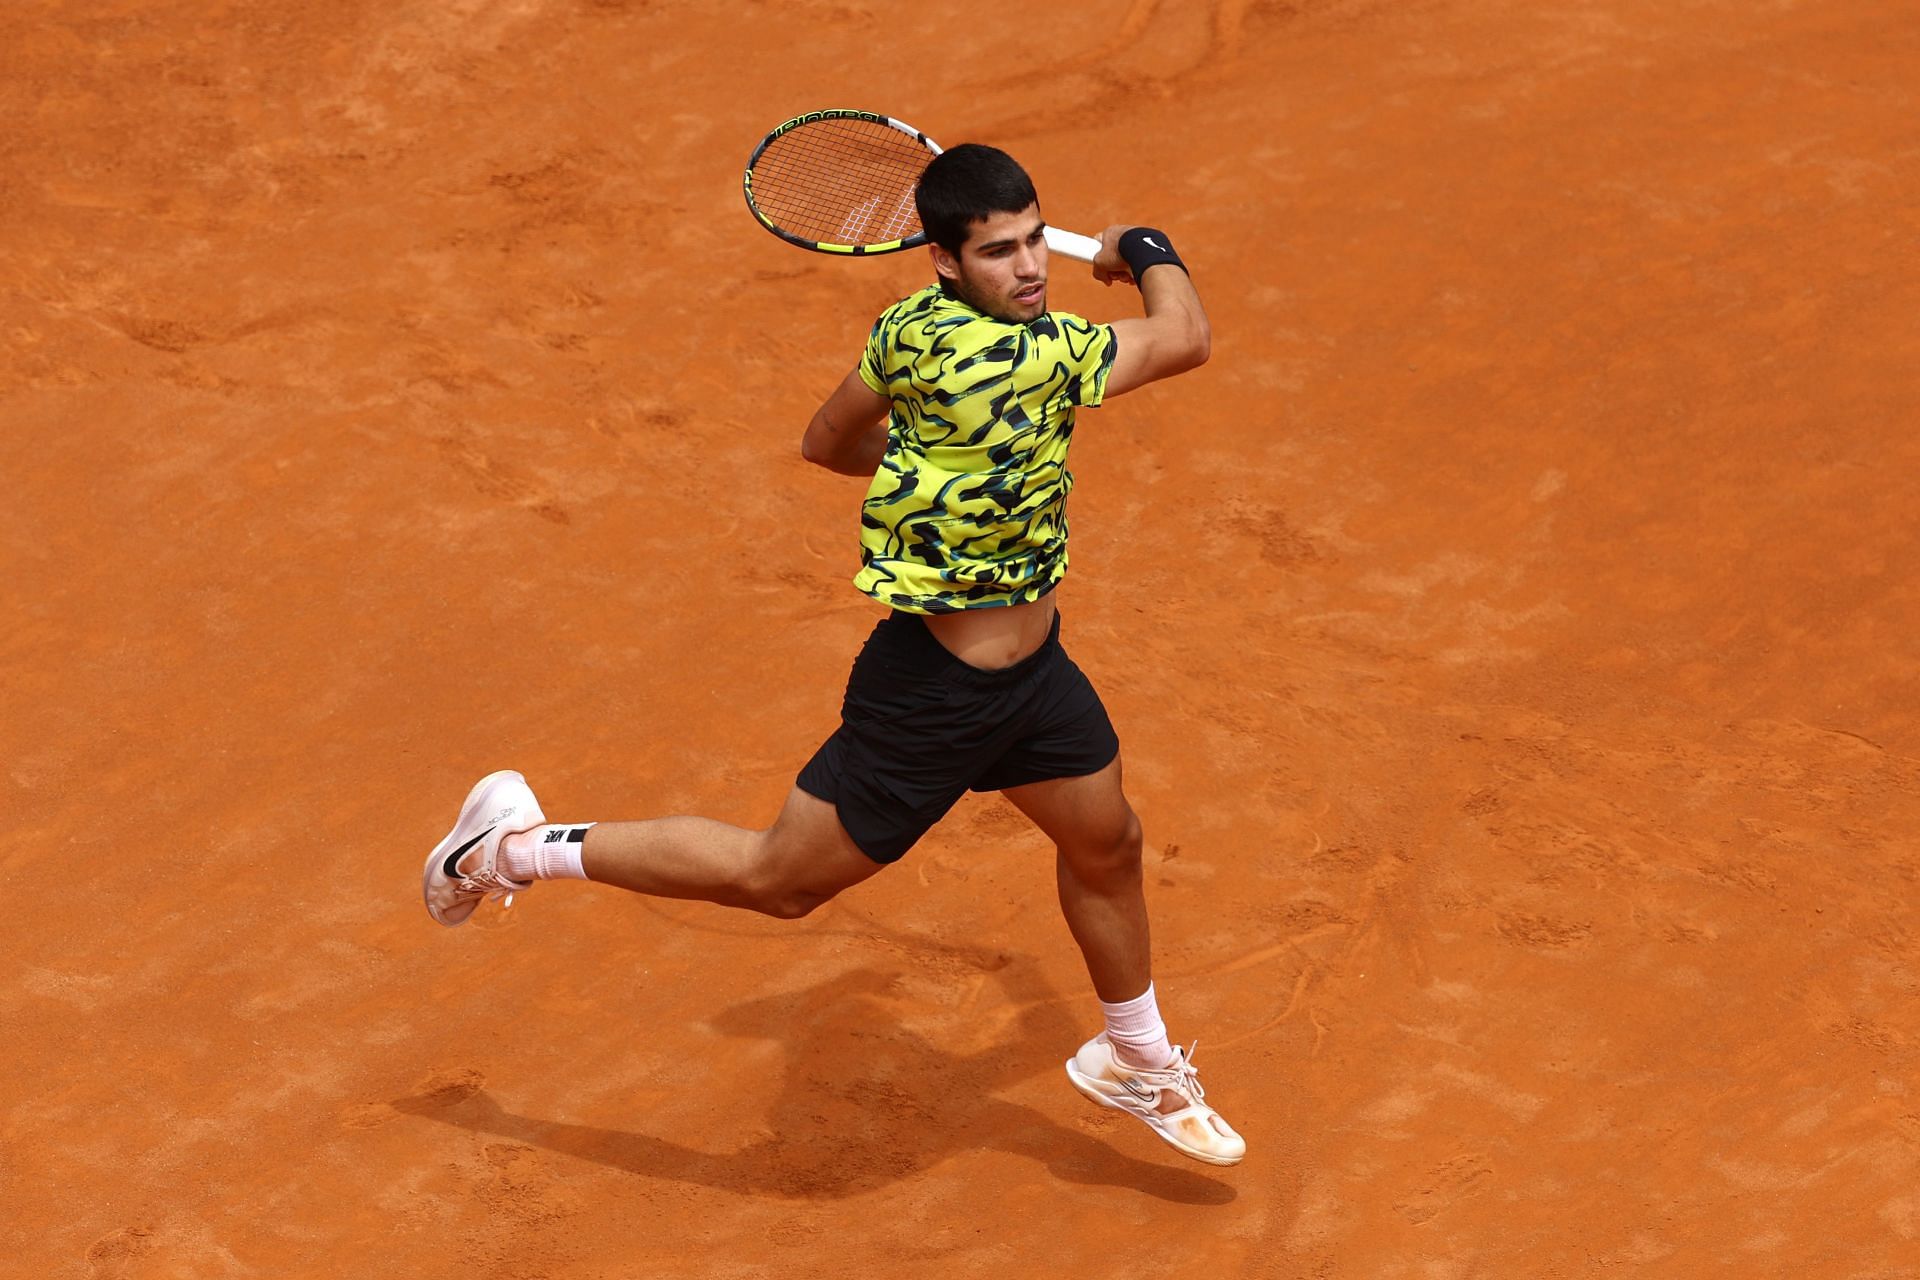 Carlos Alcaraz is the top seed at the French Open